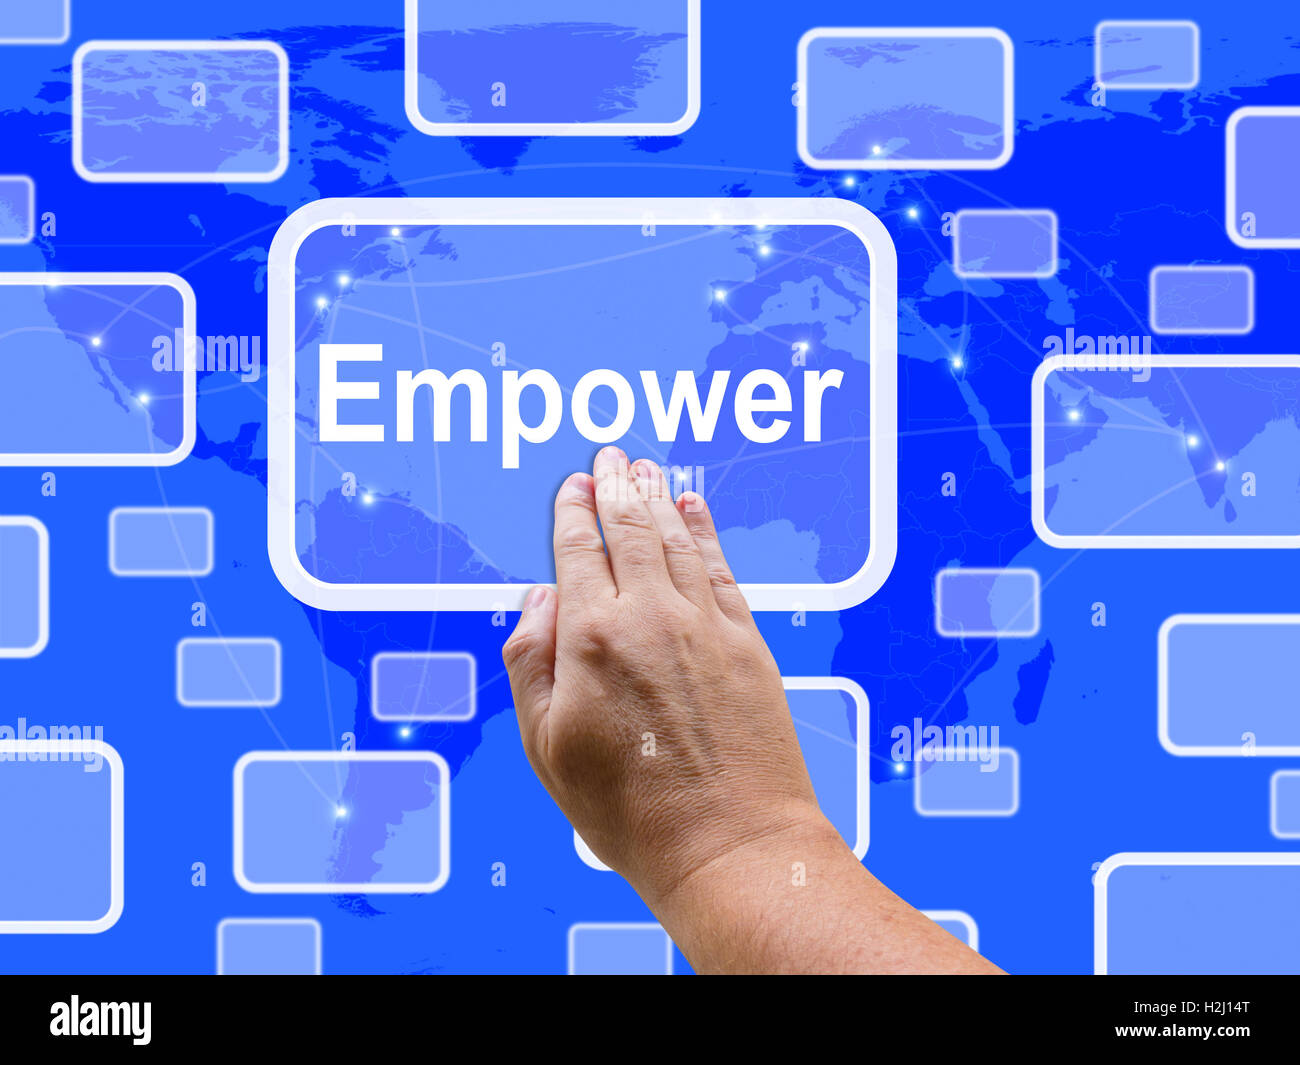 Empower Touch Screen Means Encourage Empowerment Stock Photo